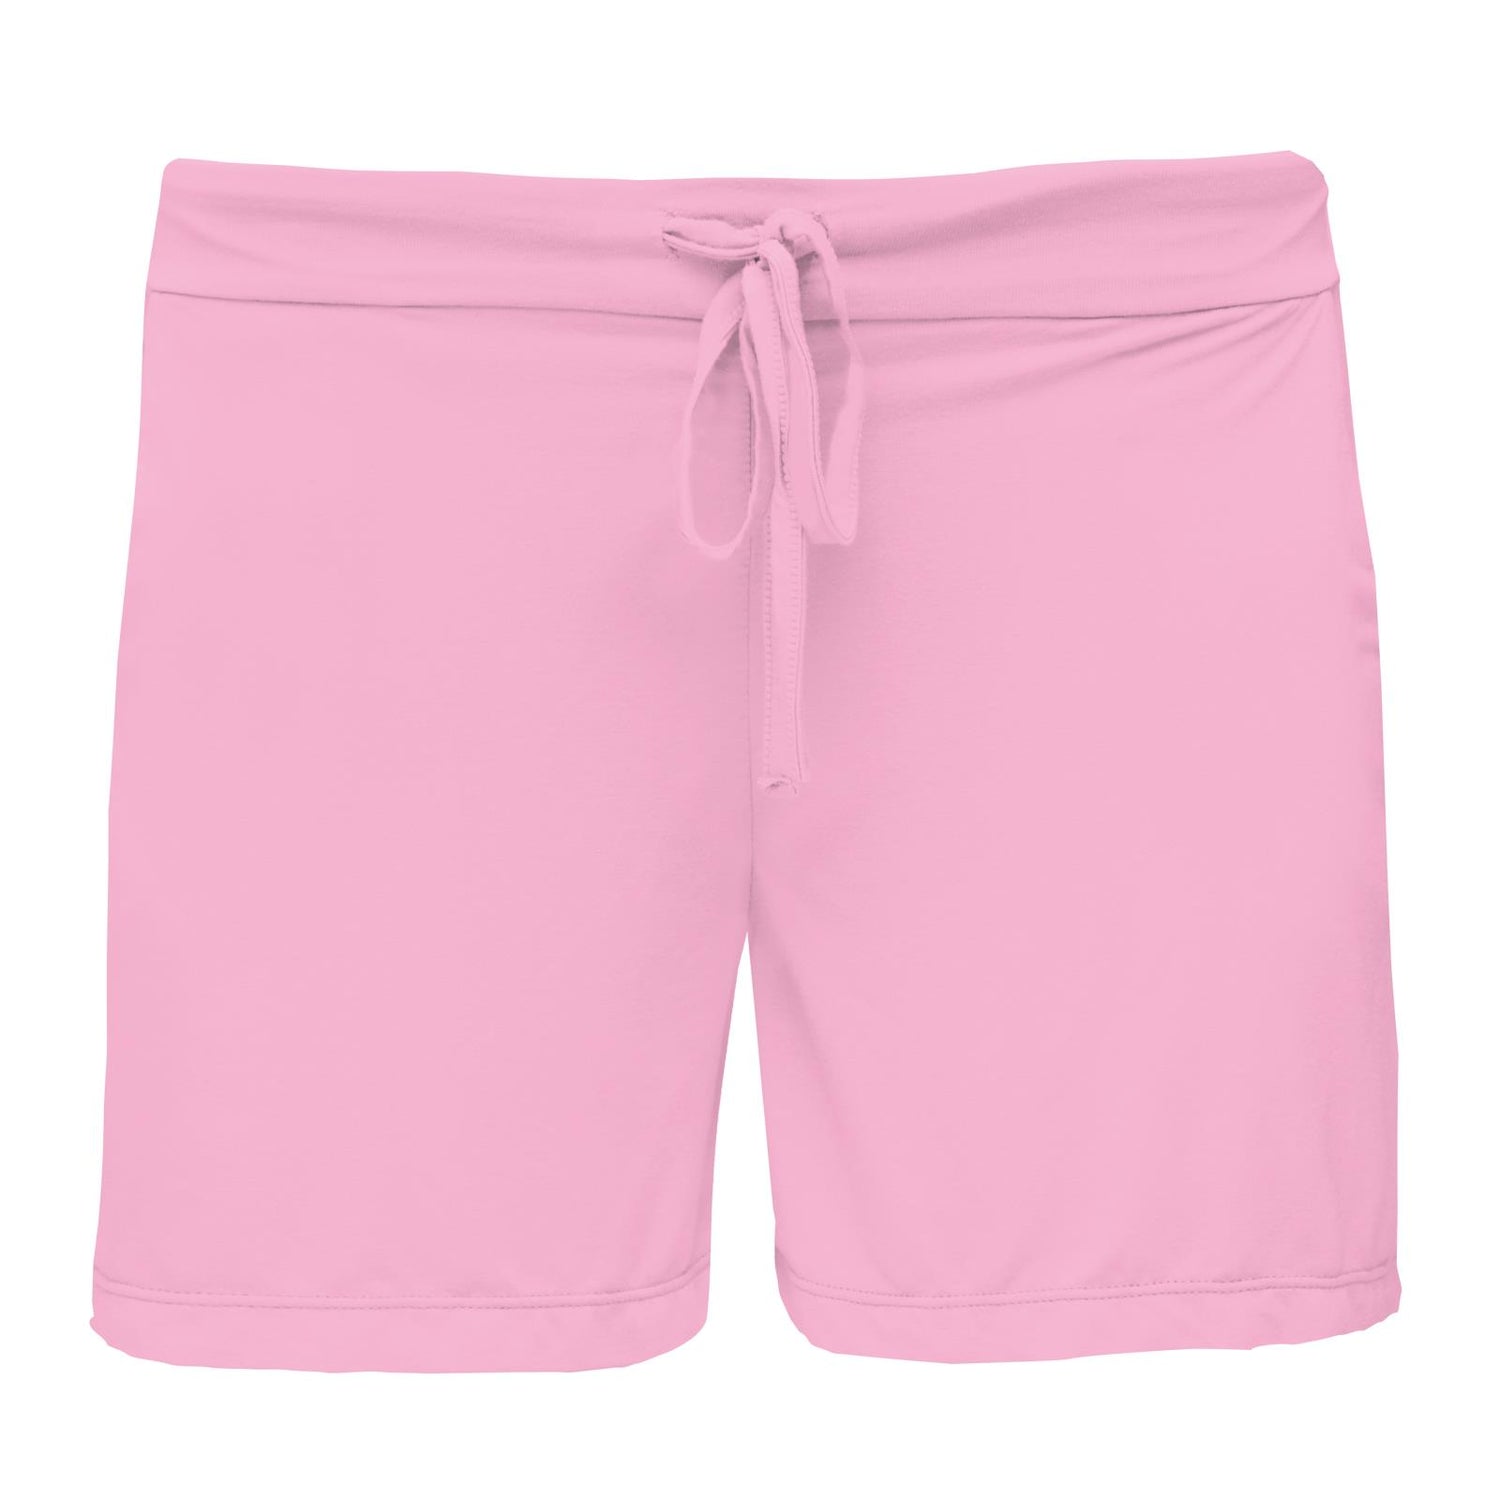 Women's Lounge Shorts in Cotton Candy